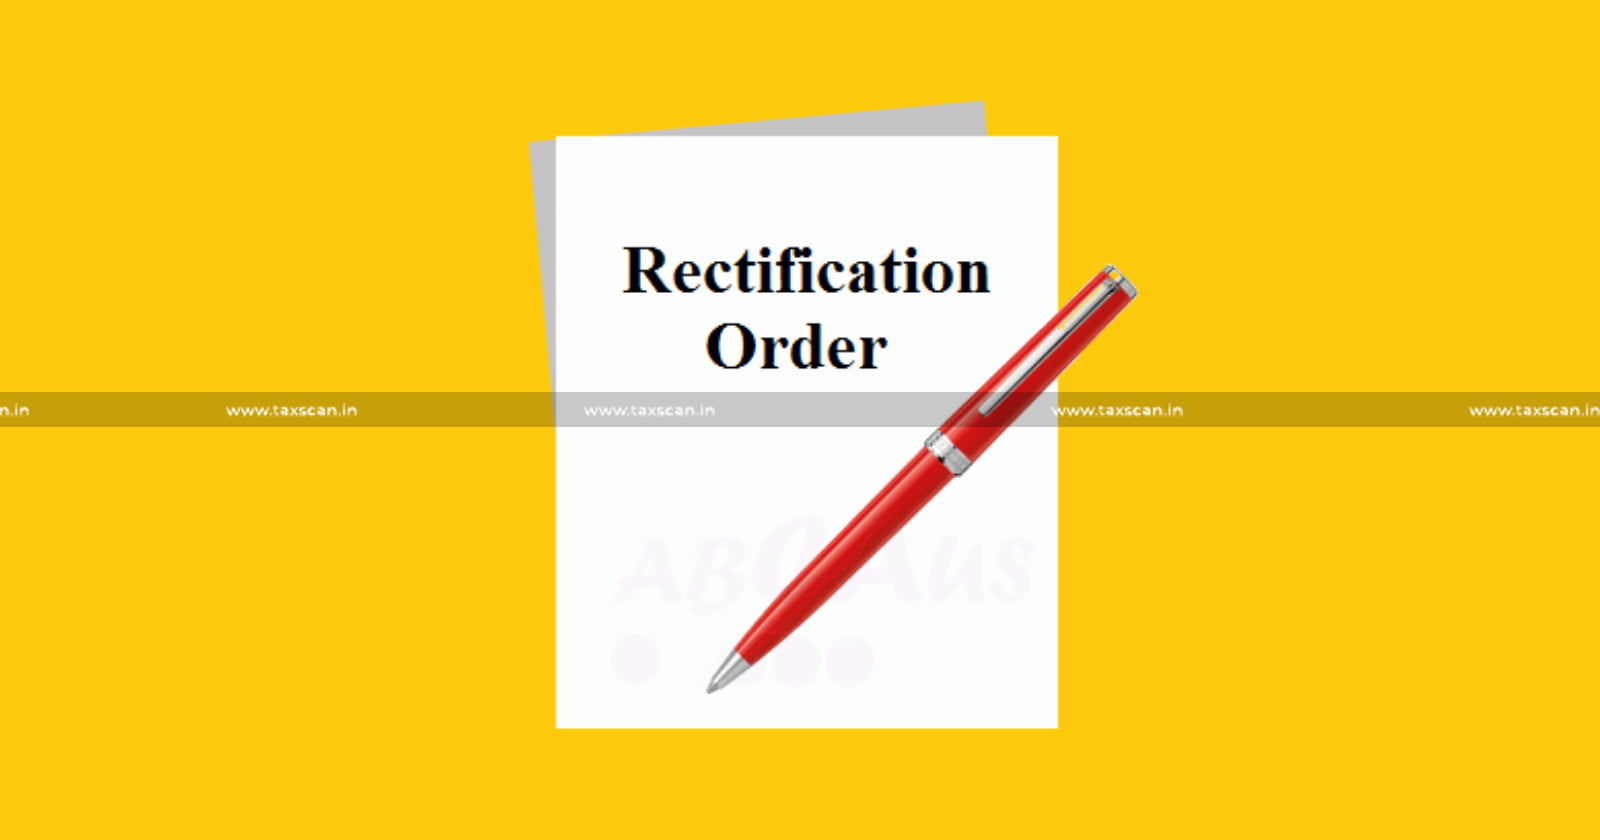 Rectification Order - Income Tax Act - Income Tax Act without Proper Verification - Proper Verification - ITAT directs re-adjudication - ITAT - Taxscan